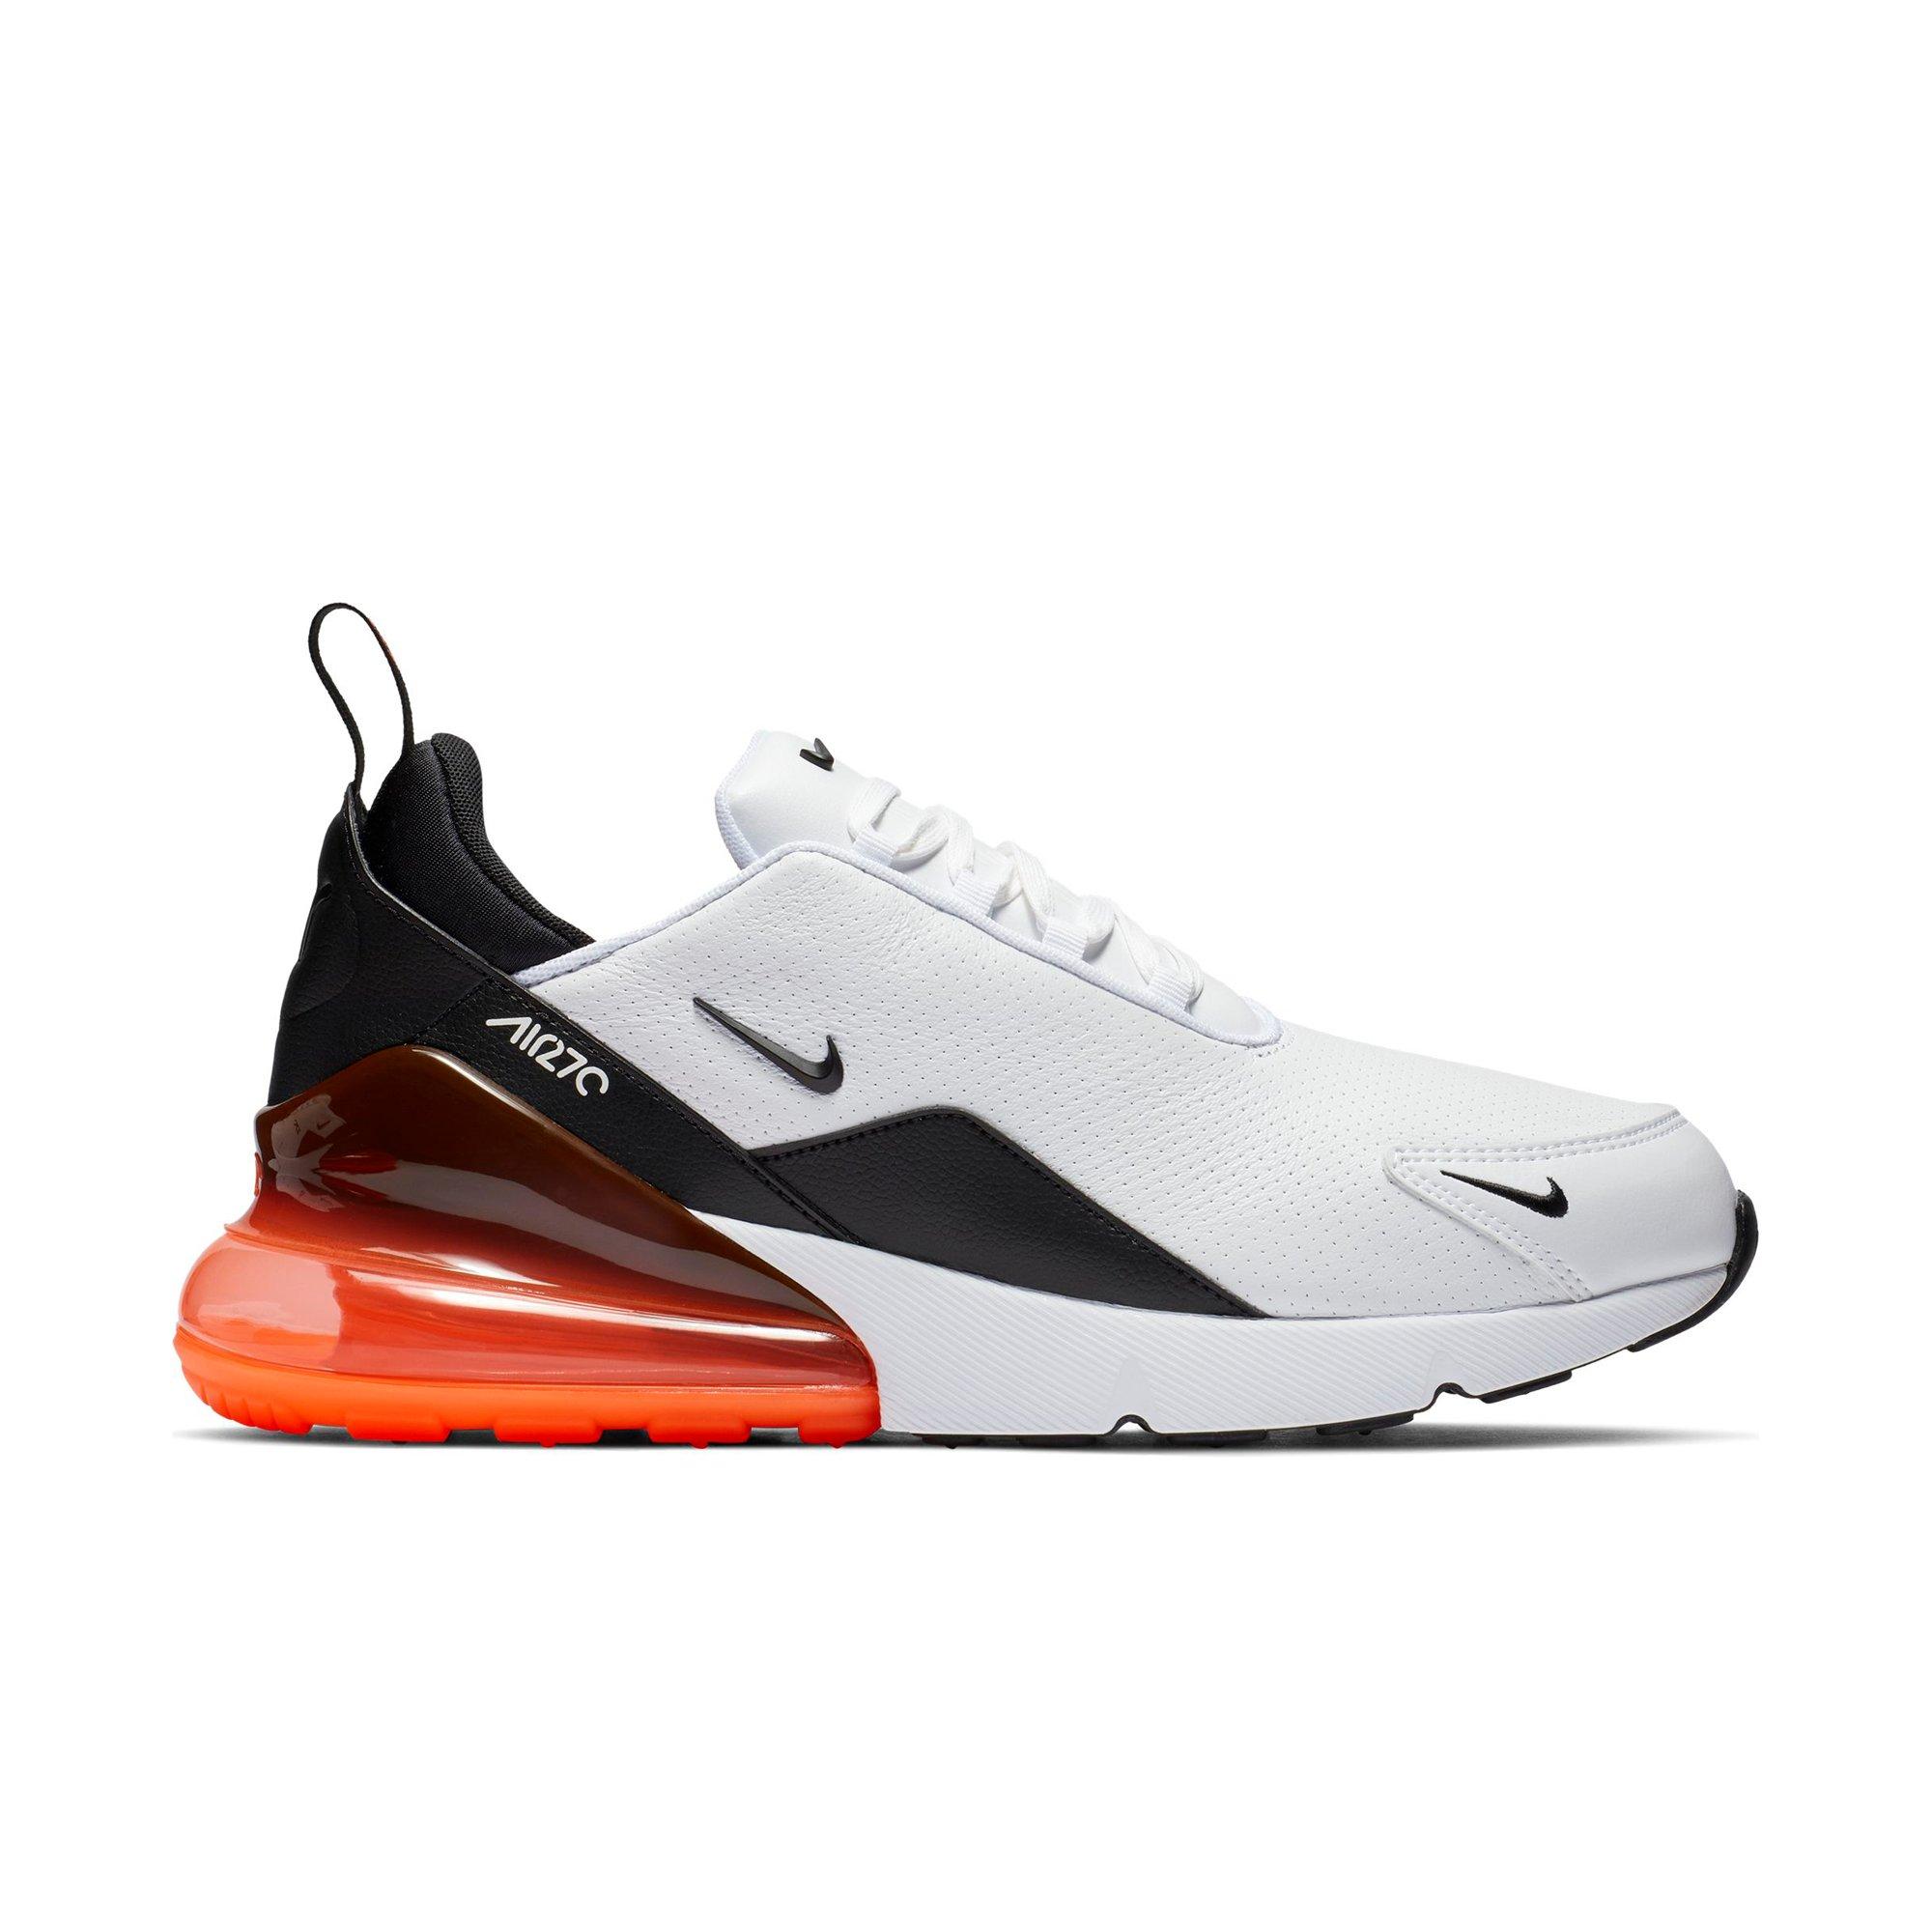 nike air max 270 red white and black